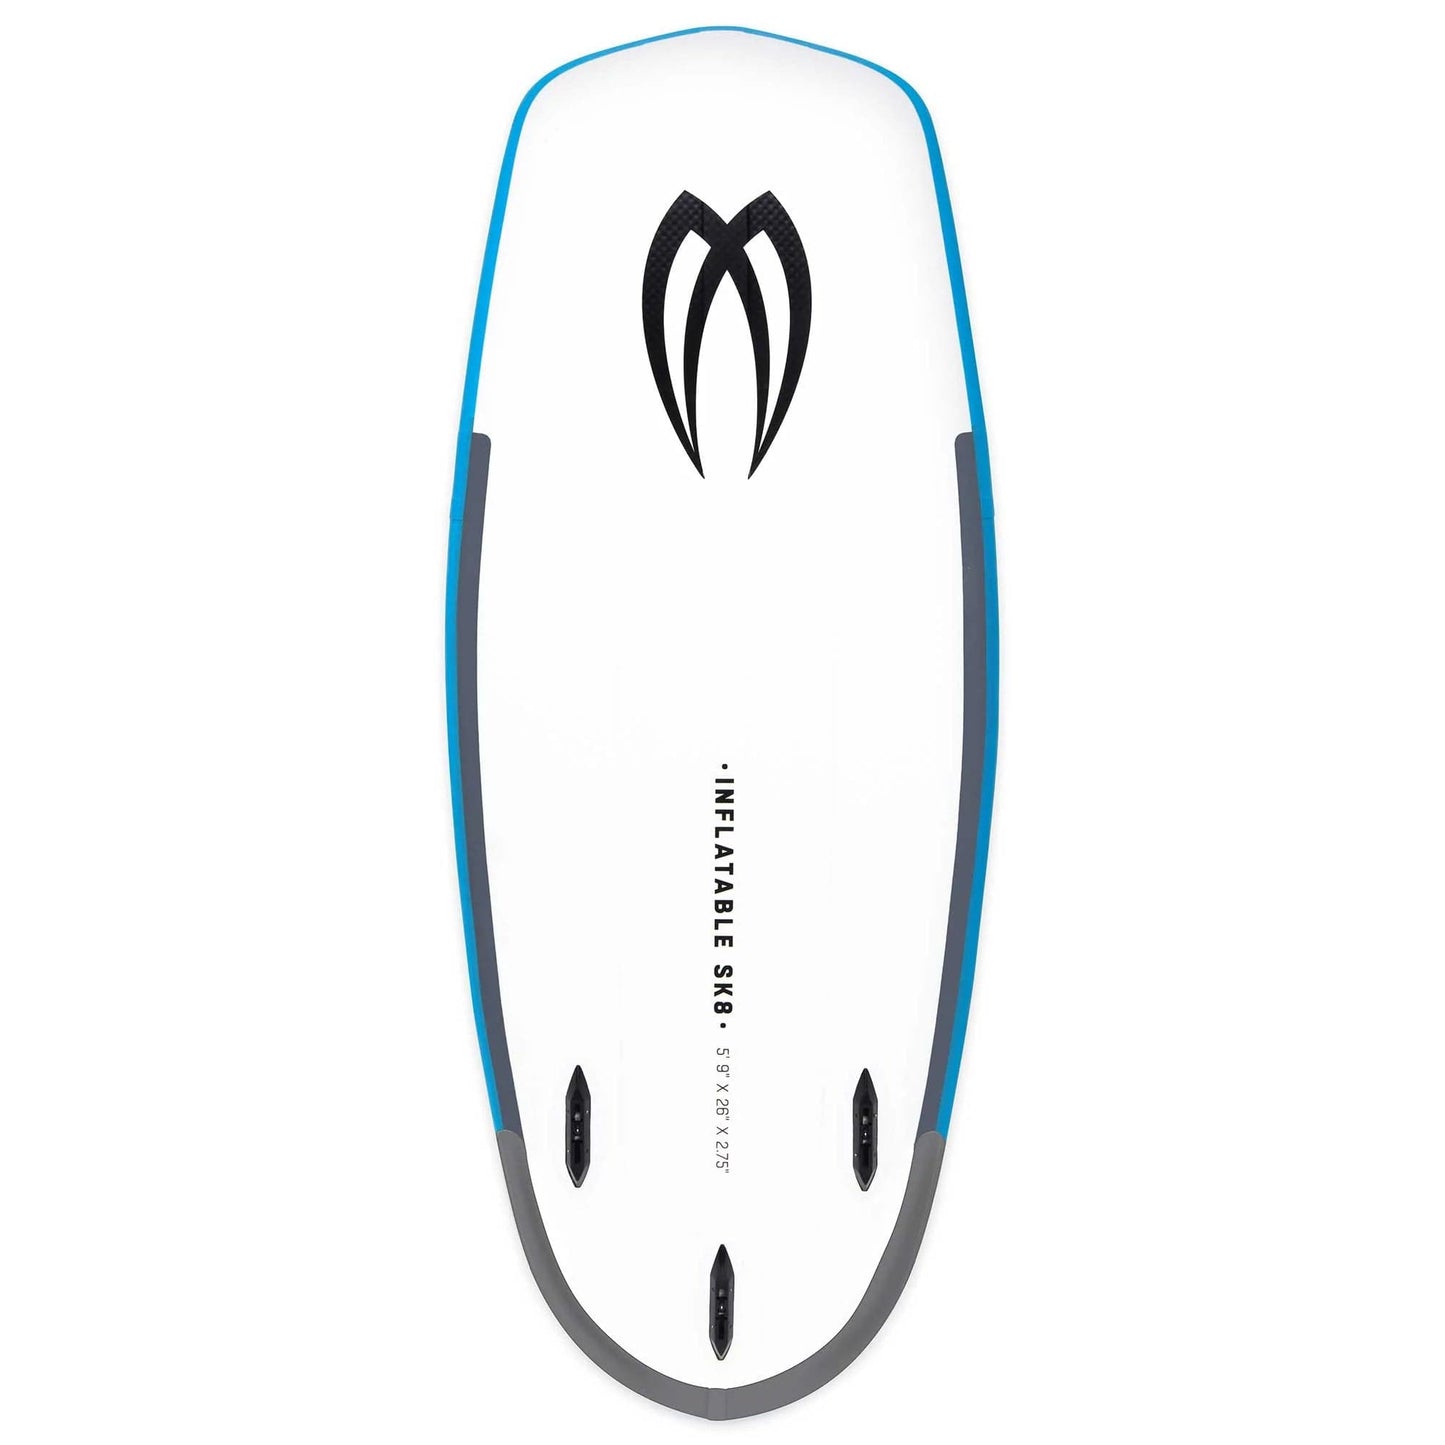 Featuring the iSK8 Wiki river surfing, whitewater sup manufactured by Badfish shown here from a third angle.